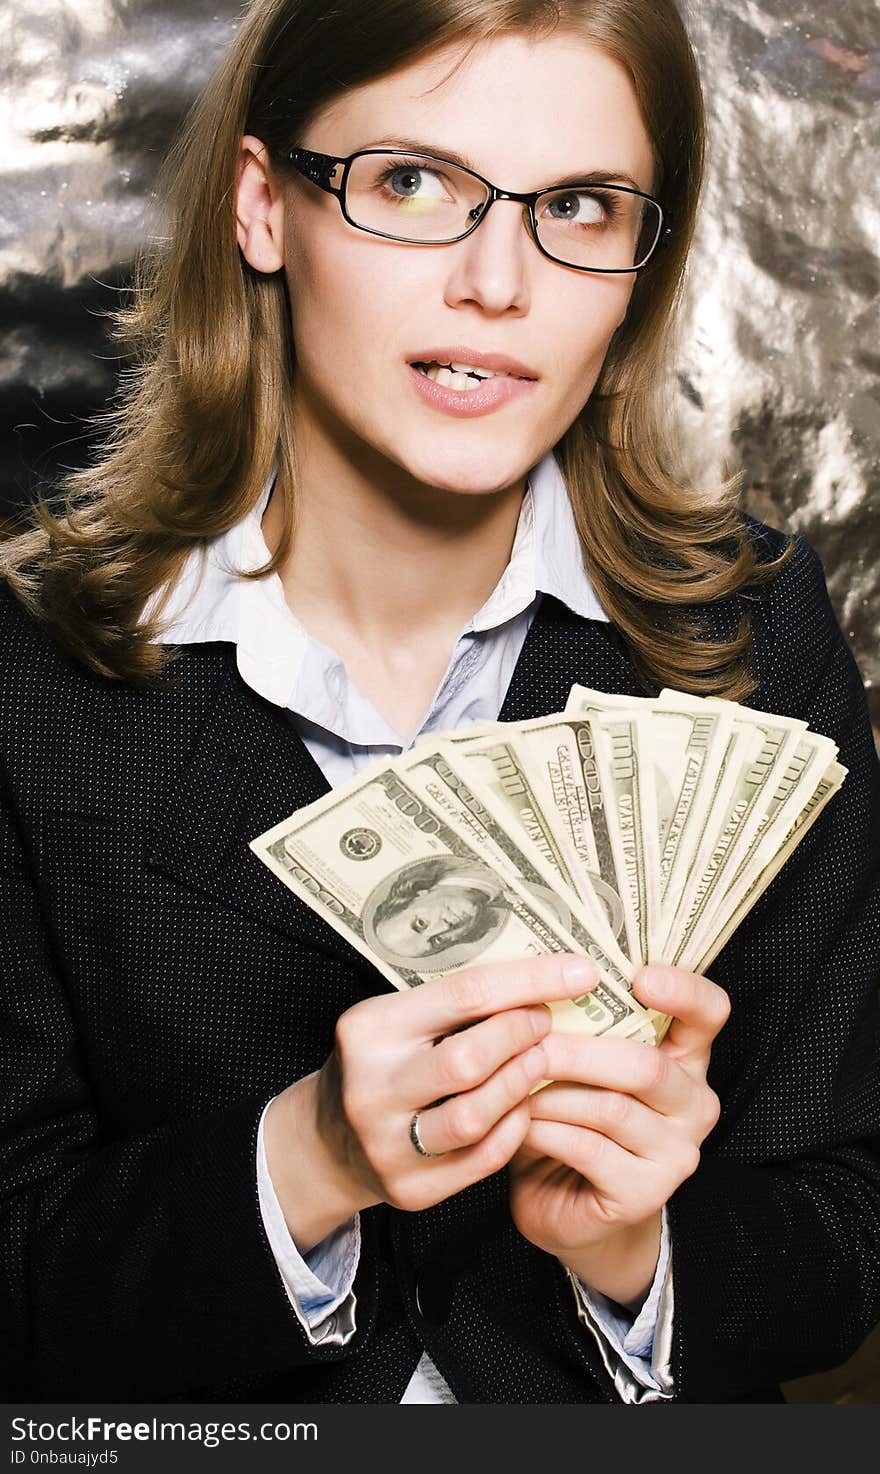 Pretty young brunette real modern woman in glasses with money cash isolated on white background happy smiling, lifestyle people concept close up